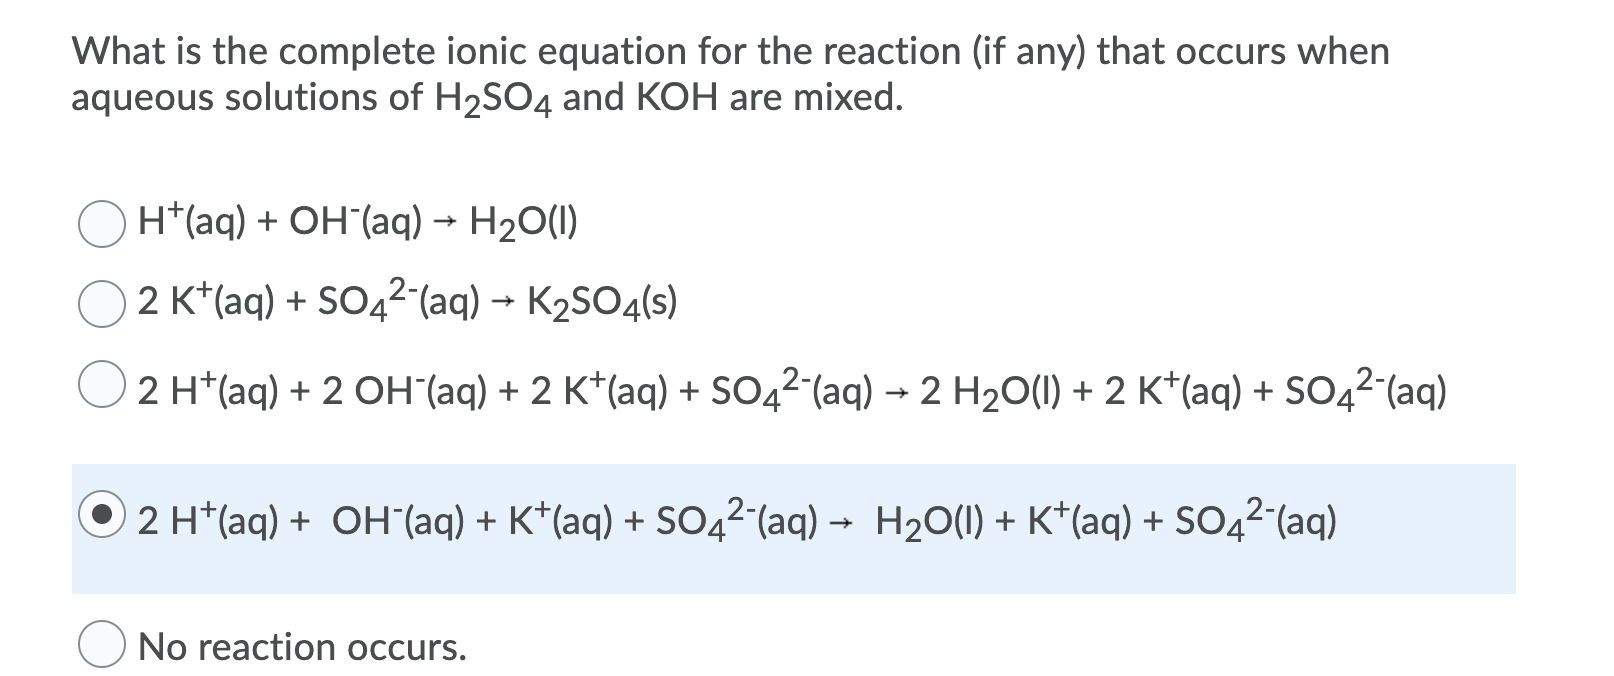 What is the complete ionic equation for the reaction (if any) that occurs when
aqueous solutions of H2SO4 and KOH are mixed.
H*(aq) + OH´(aq) → H2O(1)
2 K*(aq) + SO42-(aq) → K2SO4(s)
2 H*(aq) + 2 OH (aq) + 2 K*(aq) + SO42 (aq) → 2 H2O(1) + 2 K*(aq) + SO42-(aq)
2 H*(aq) + OH'(aq) + K*(aq) + SO42-(aq) –
H2O(1) + K*(aq) + SO4²-(aq)
No reaction occurs.
